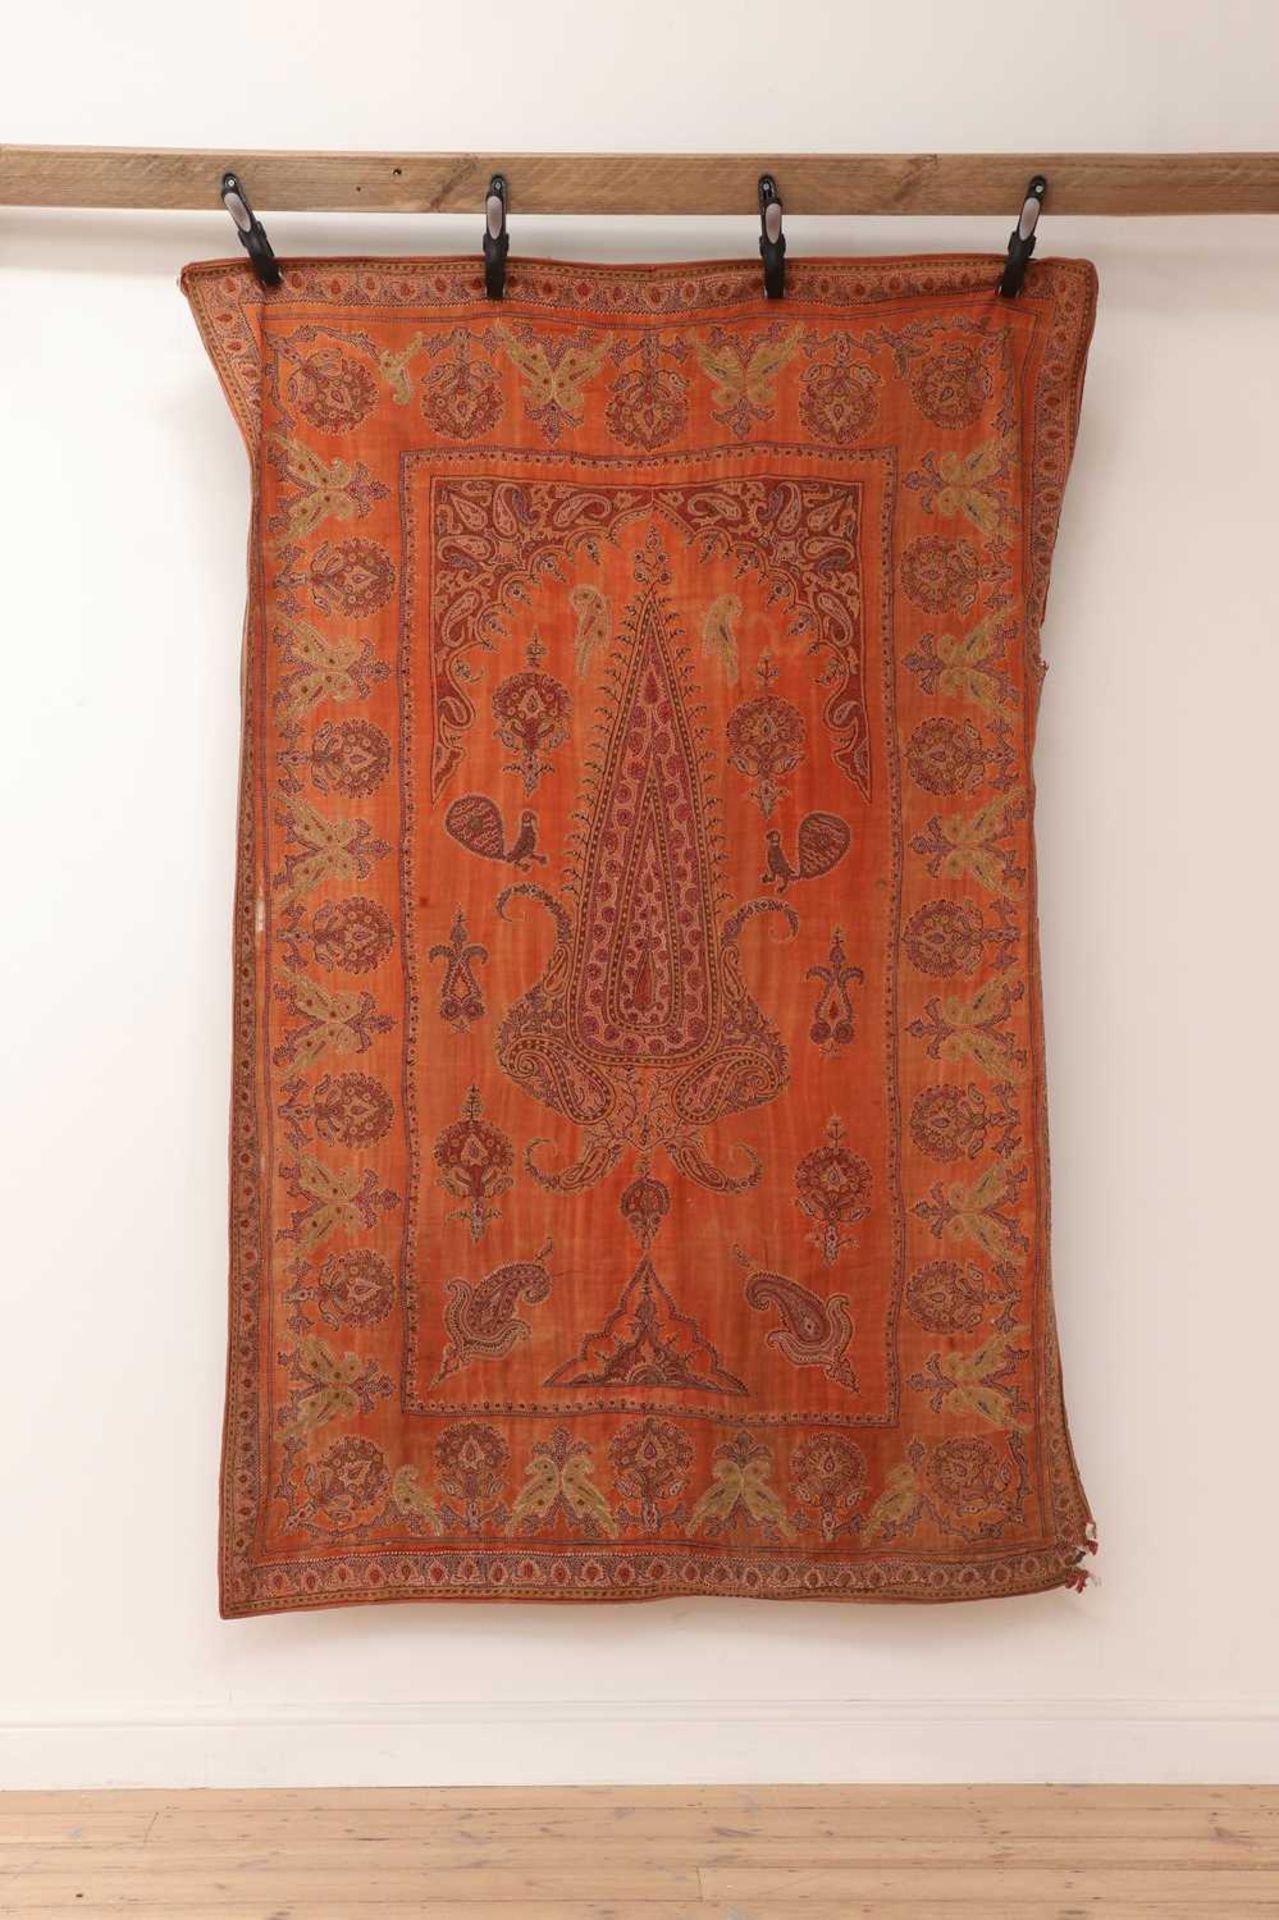 A Kermani pateh embroidered textile hanging,